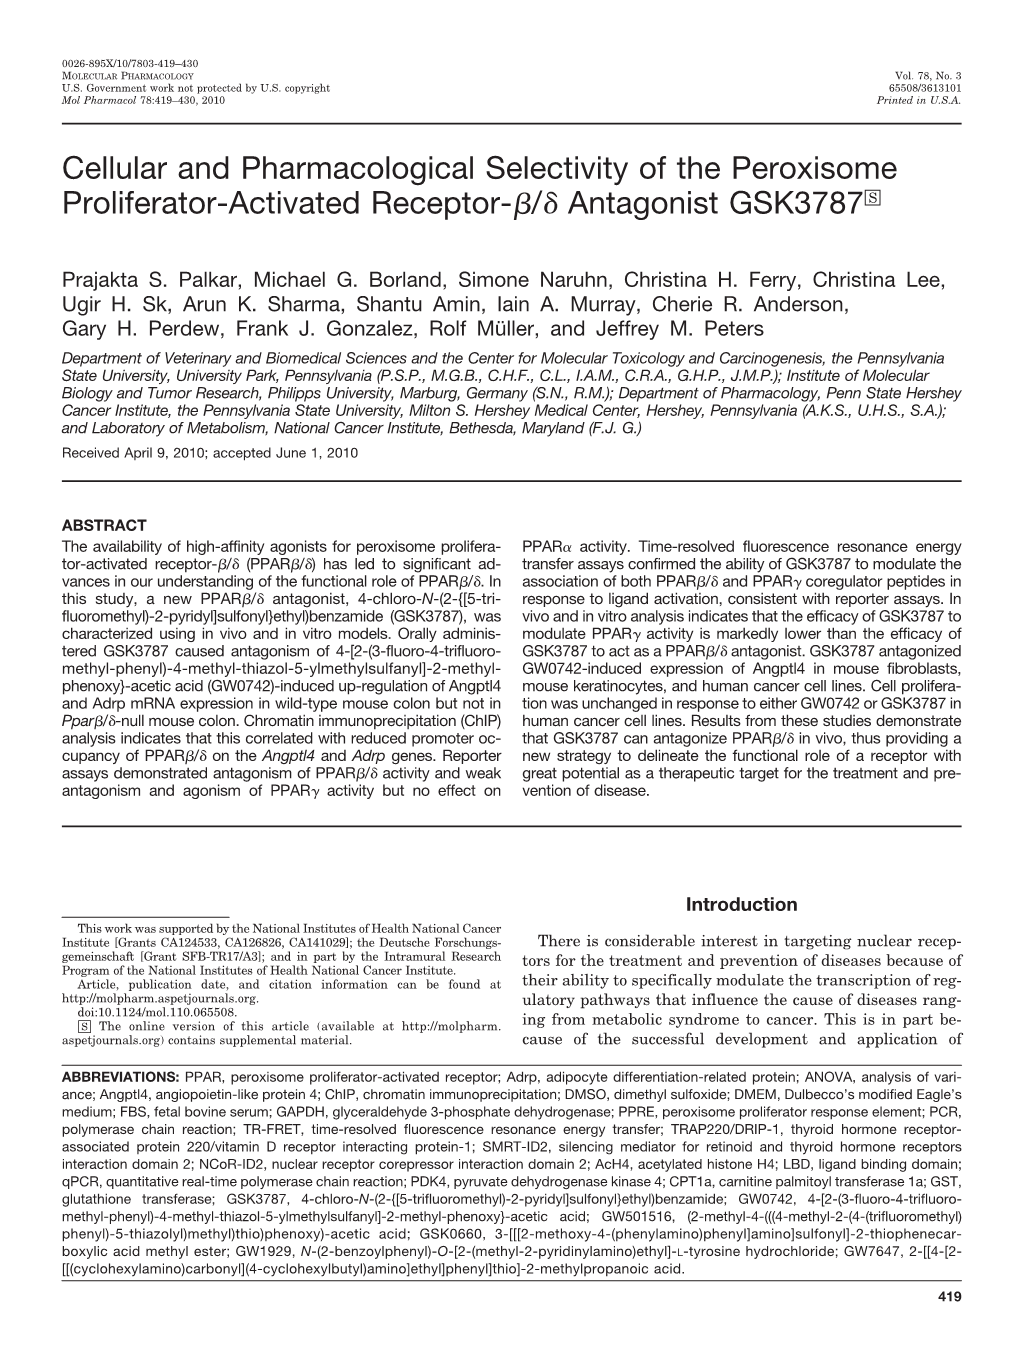 Cellular and Pharmacological Selectivity of the Peroxisome Proliferator-Activated Receptor-ß/Δ Antagonist GSK3787